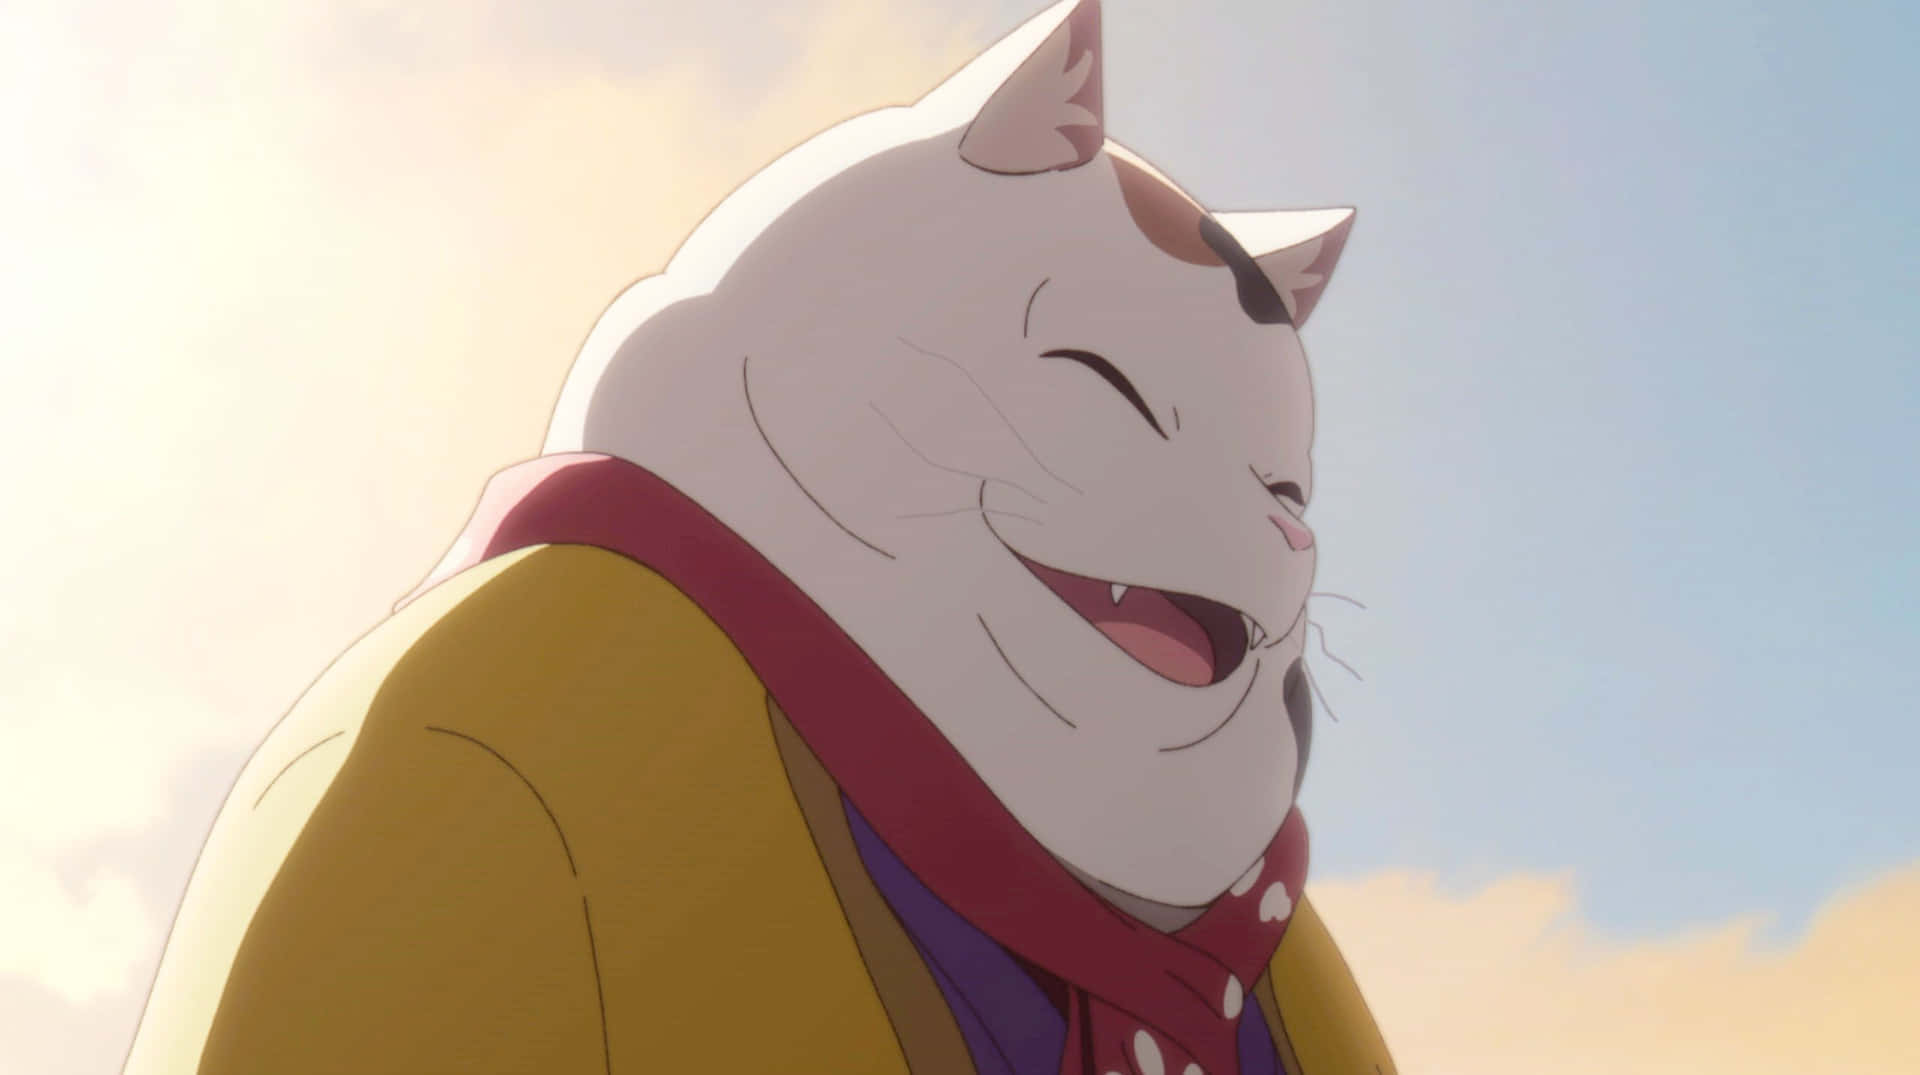 Enjoy A Whisker Away, a heartwarming anime film about friendship and courage